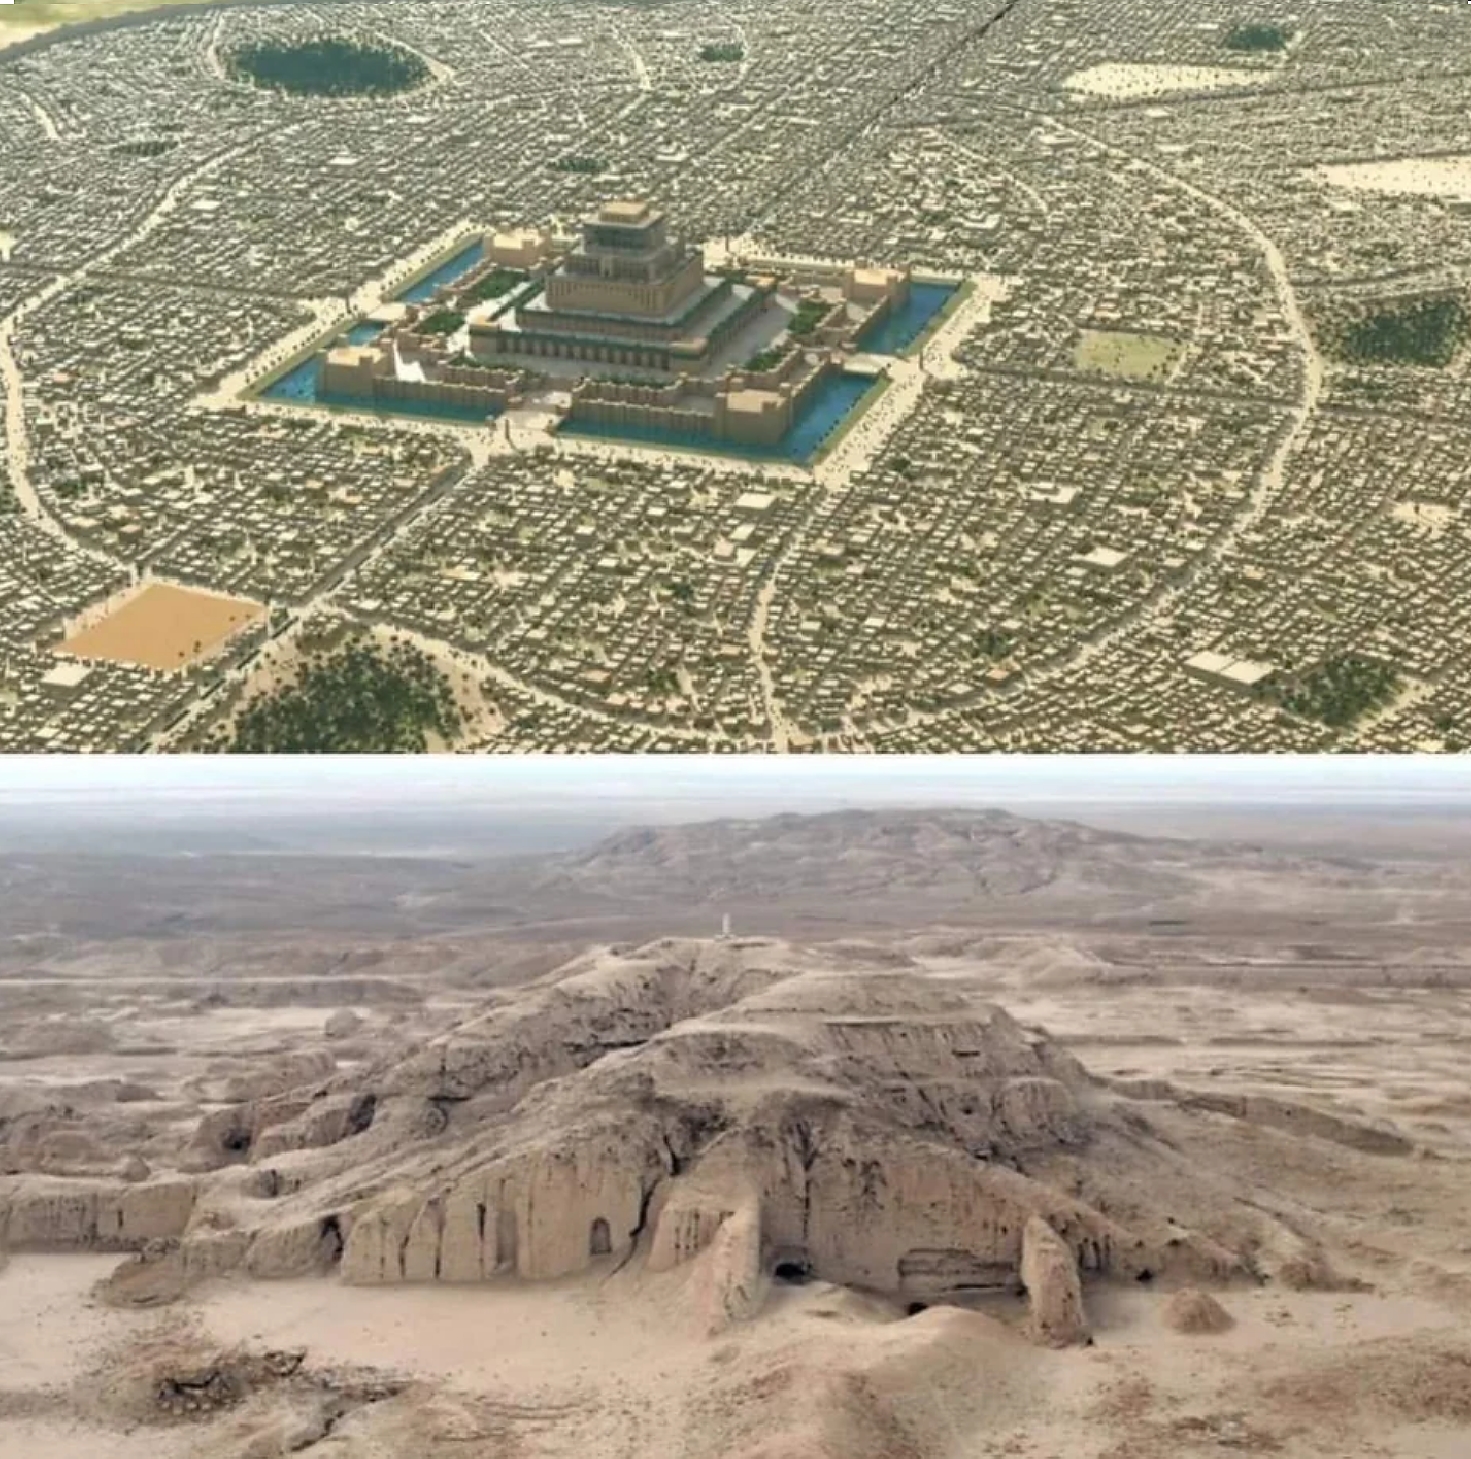 Sumerian city of Uruk, considered first civilized city in the world 6500-4000 BC..jpg